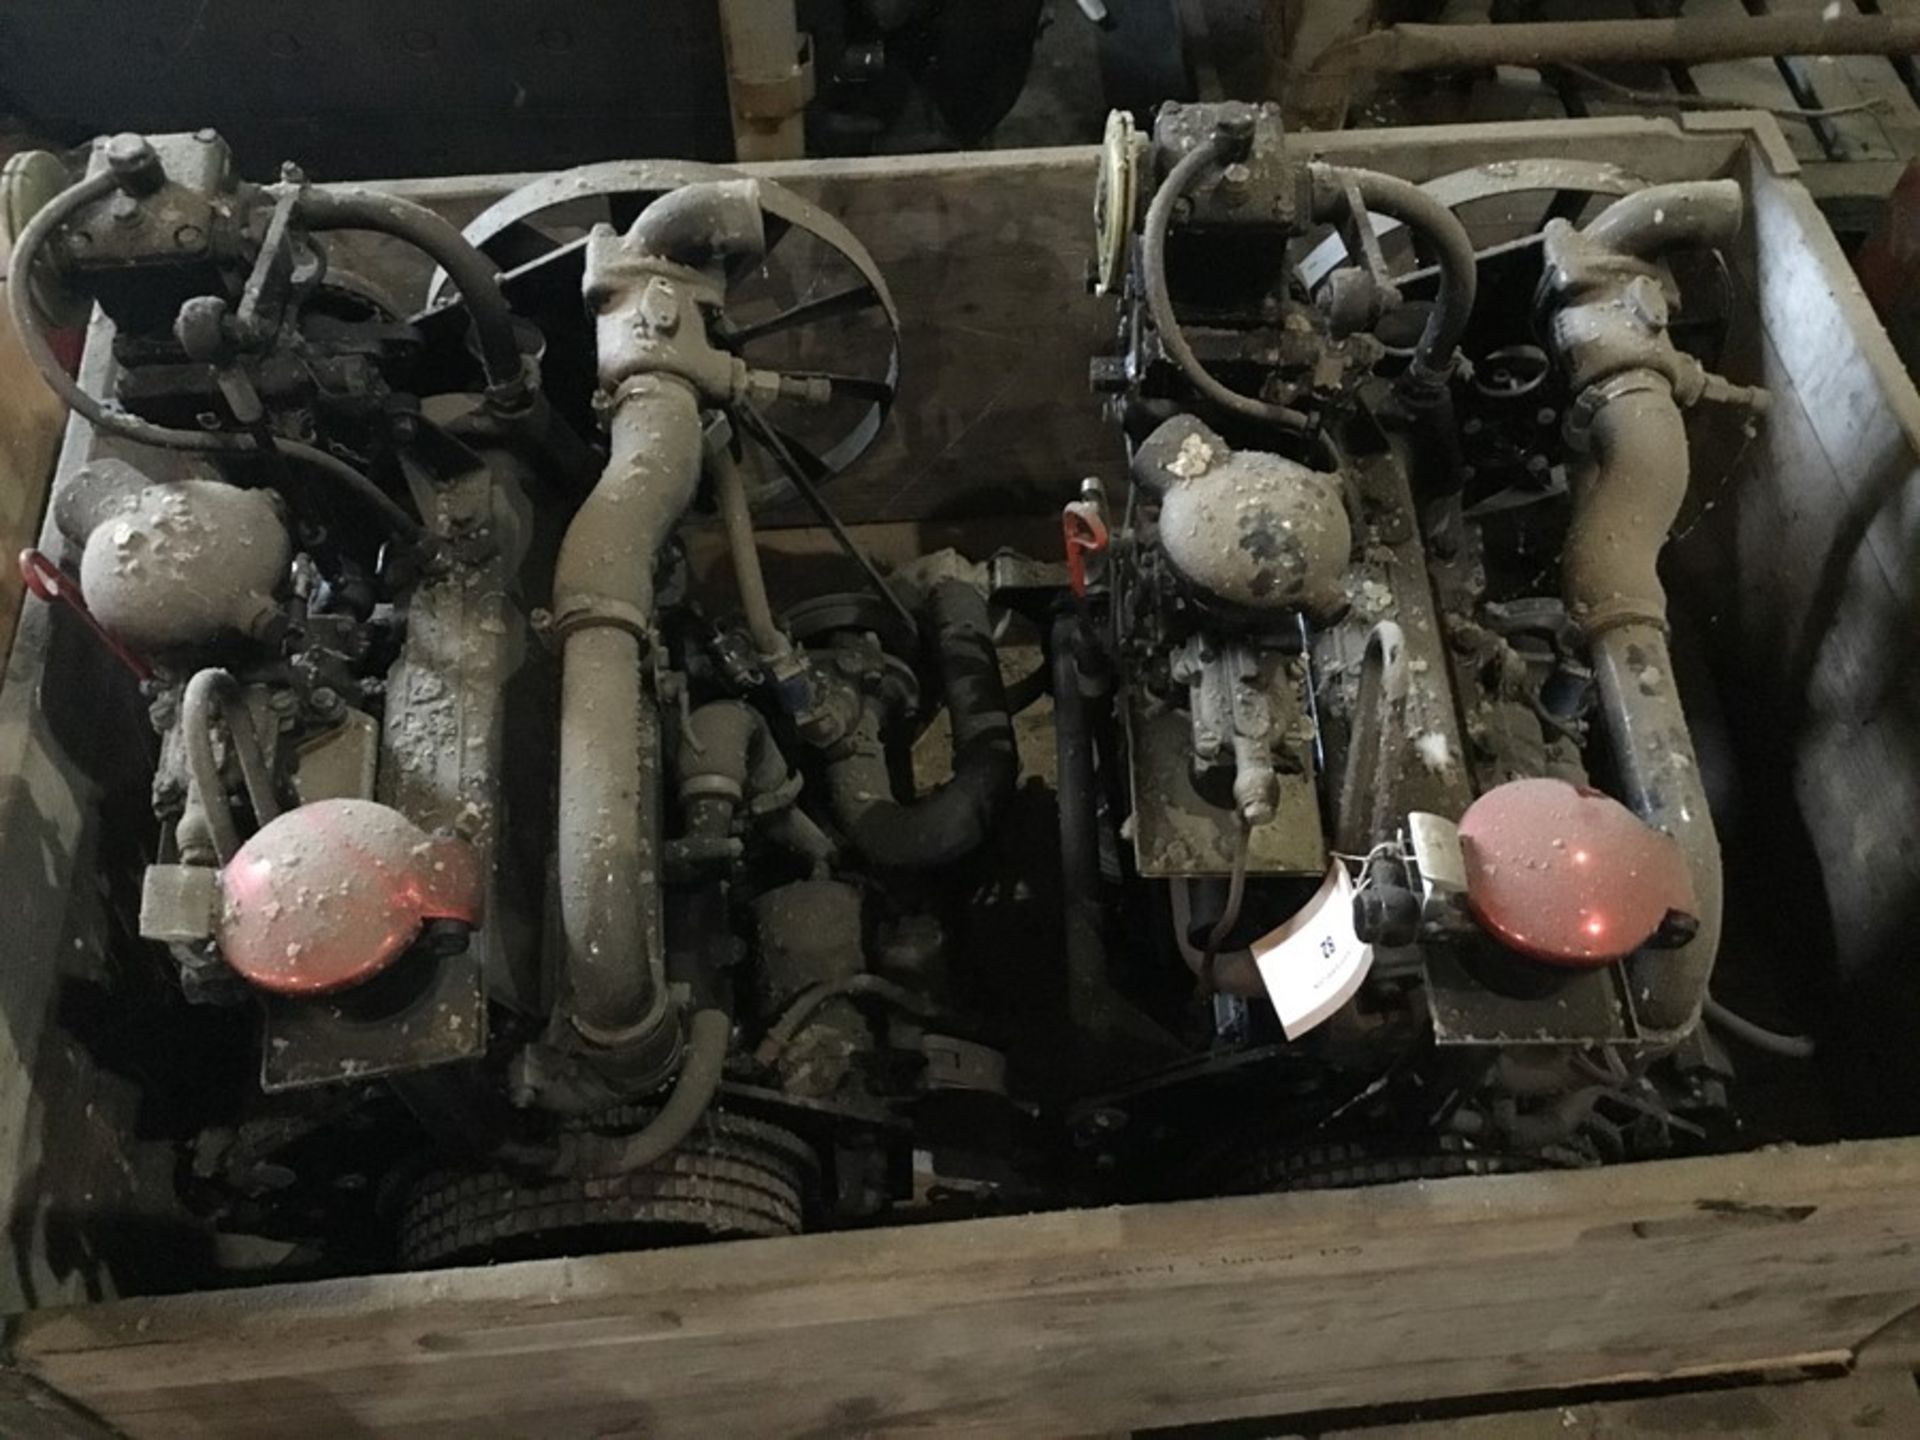 Pair of Coventry FWMB509 Petrol Engine: Coventry FWMB509 4cyl non turbo Incomplete - Image 2 of 6